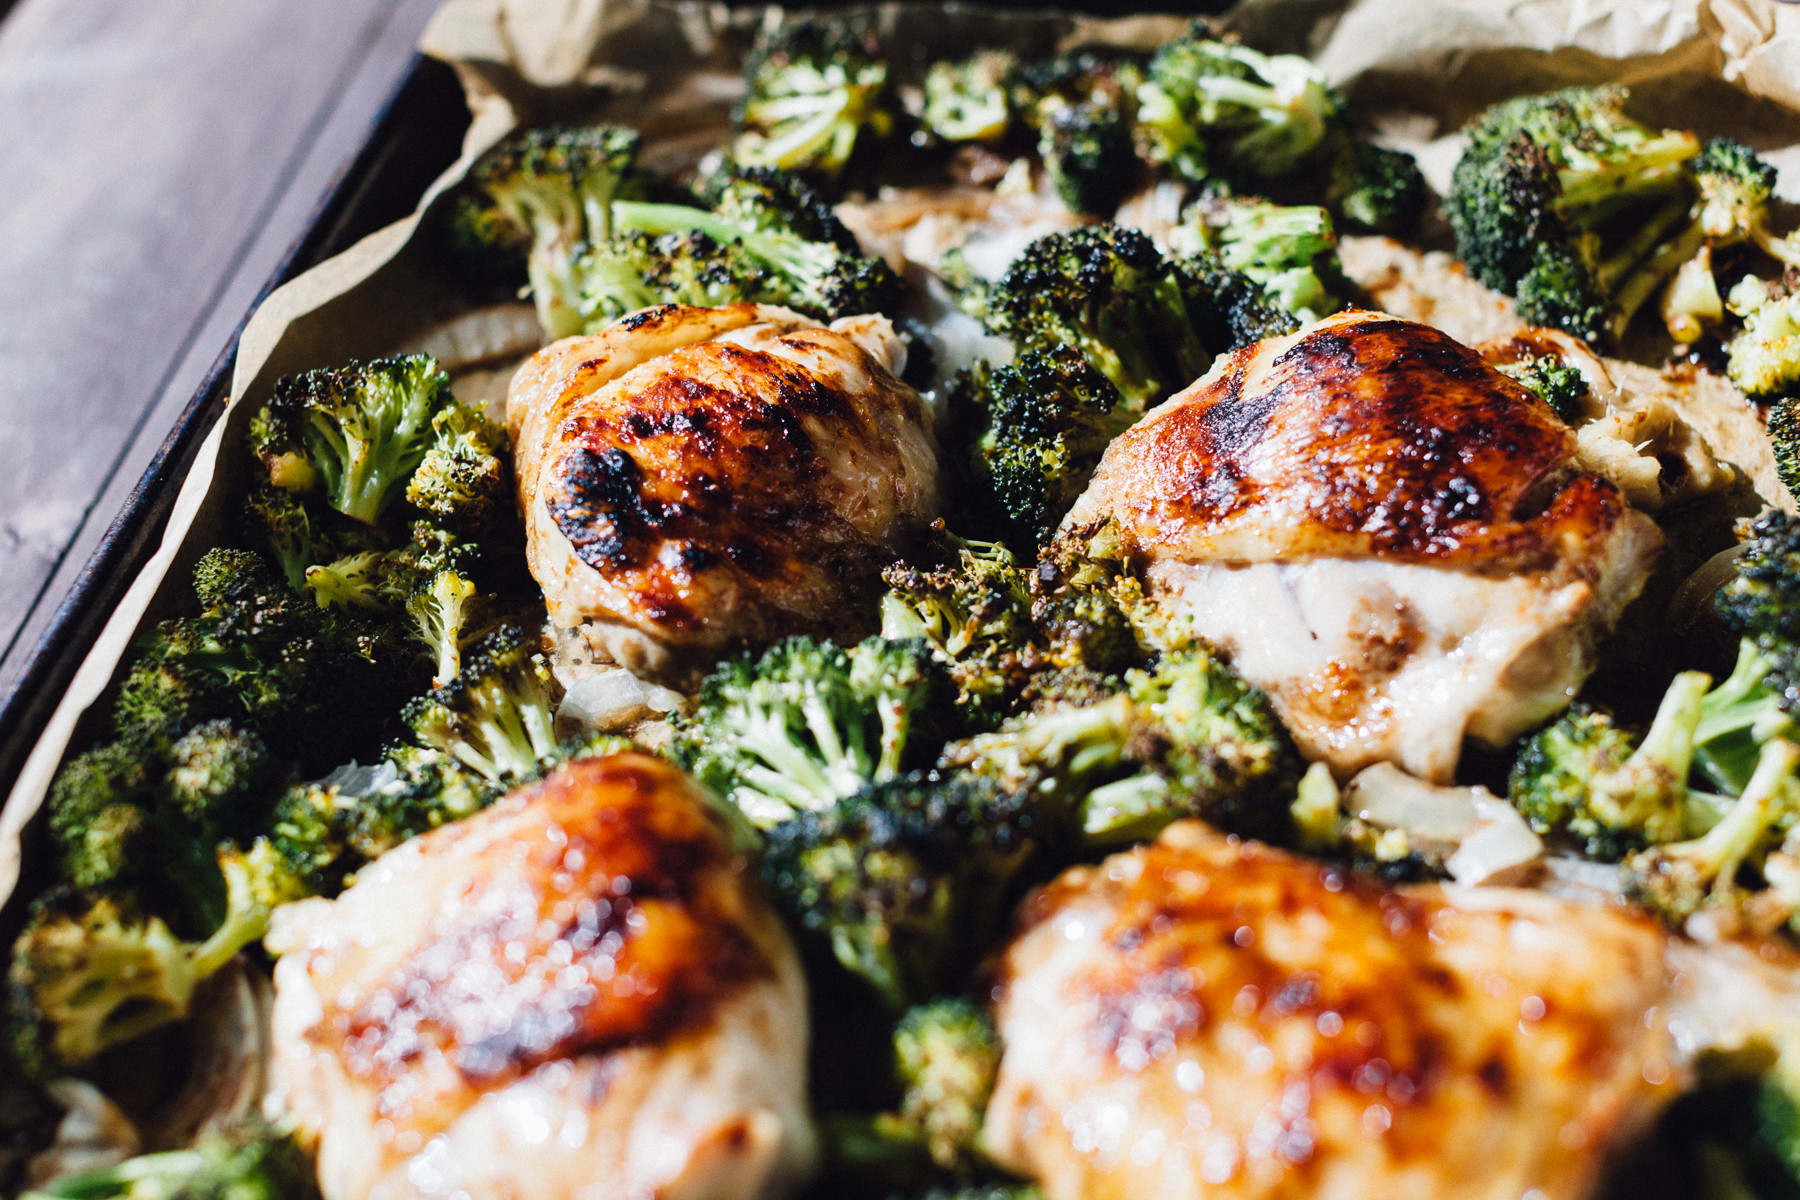 Sheet Pan Chicken Thighs And Broccoli
 The Best Sheet Pan Chicken Thighs and Broccoli Best